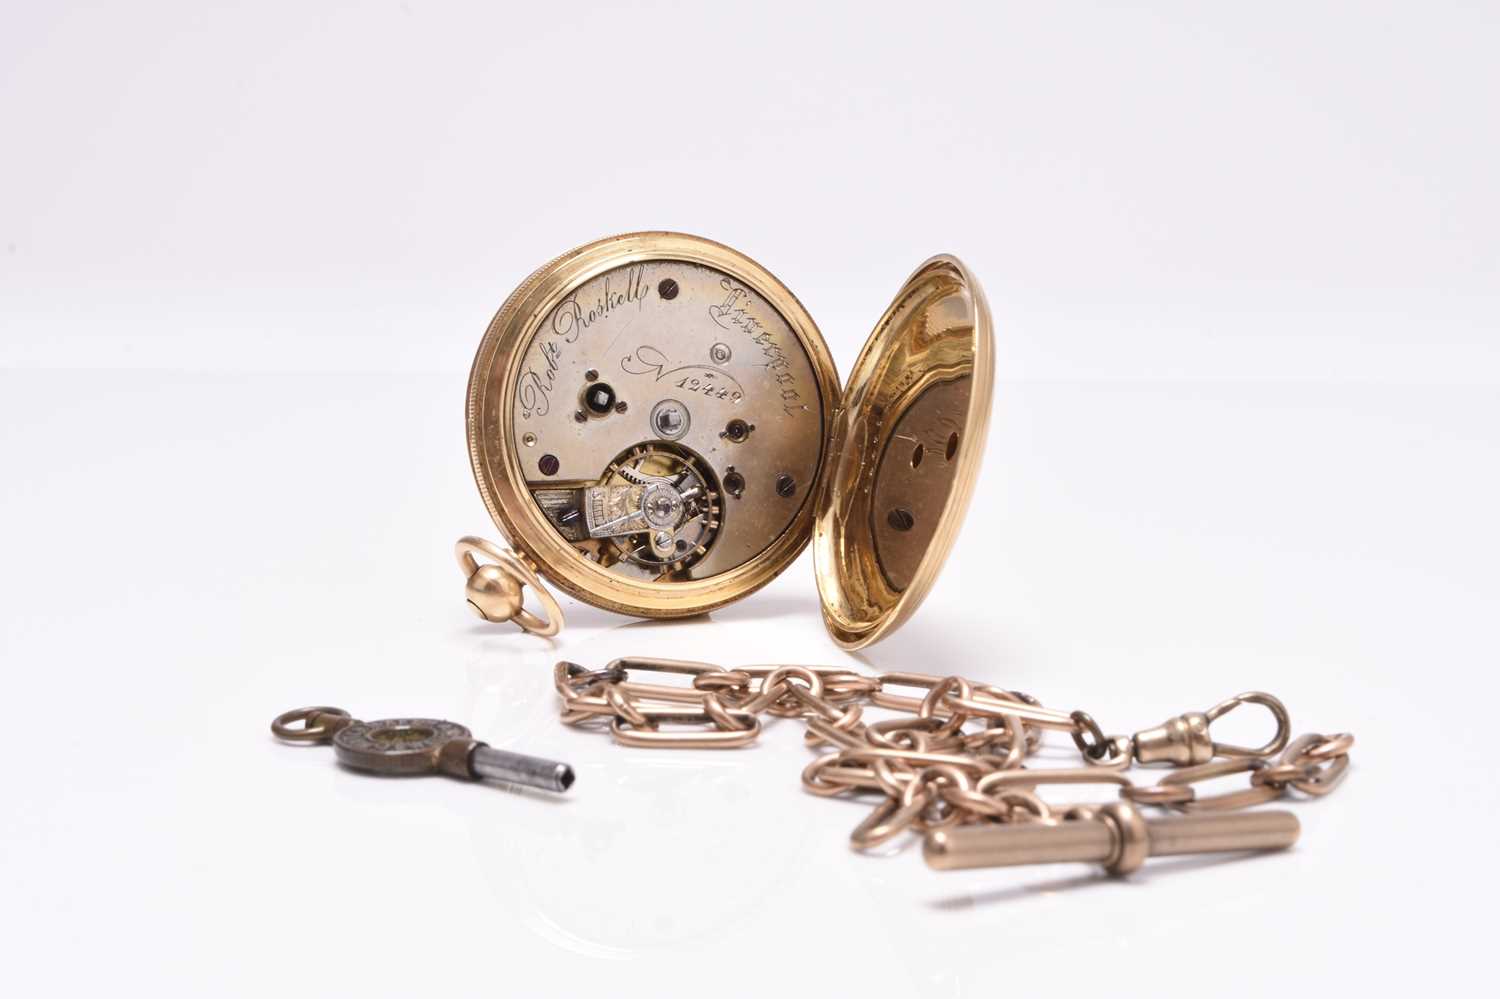 Robert Roskells: An 18ct gold hunter pocket watch with base metal Albert chain - Image 2 of 9